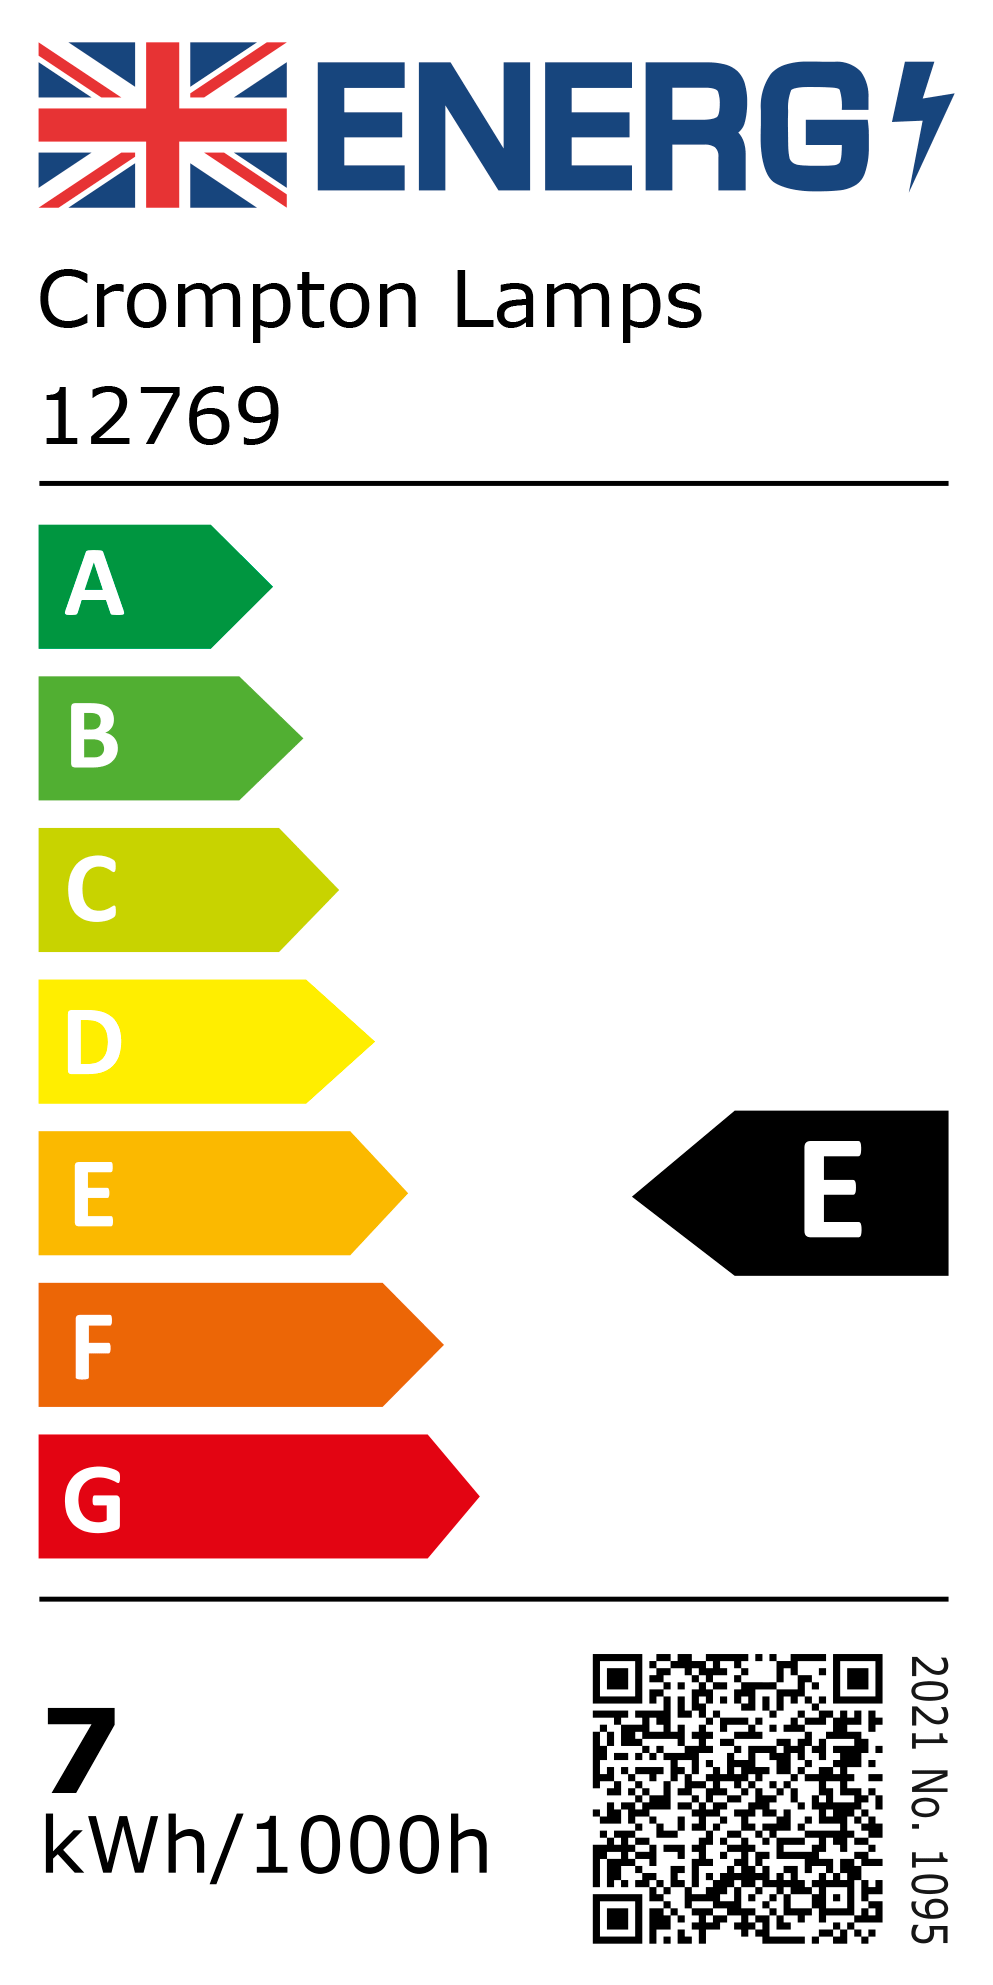 New 2021 Energy Rating Label: Stock Code 12769